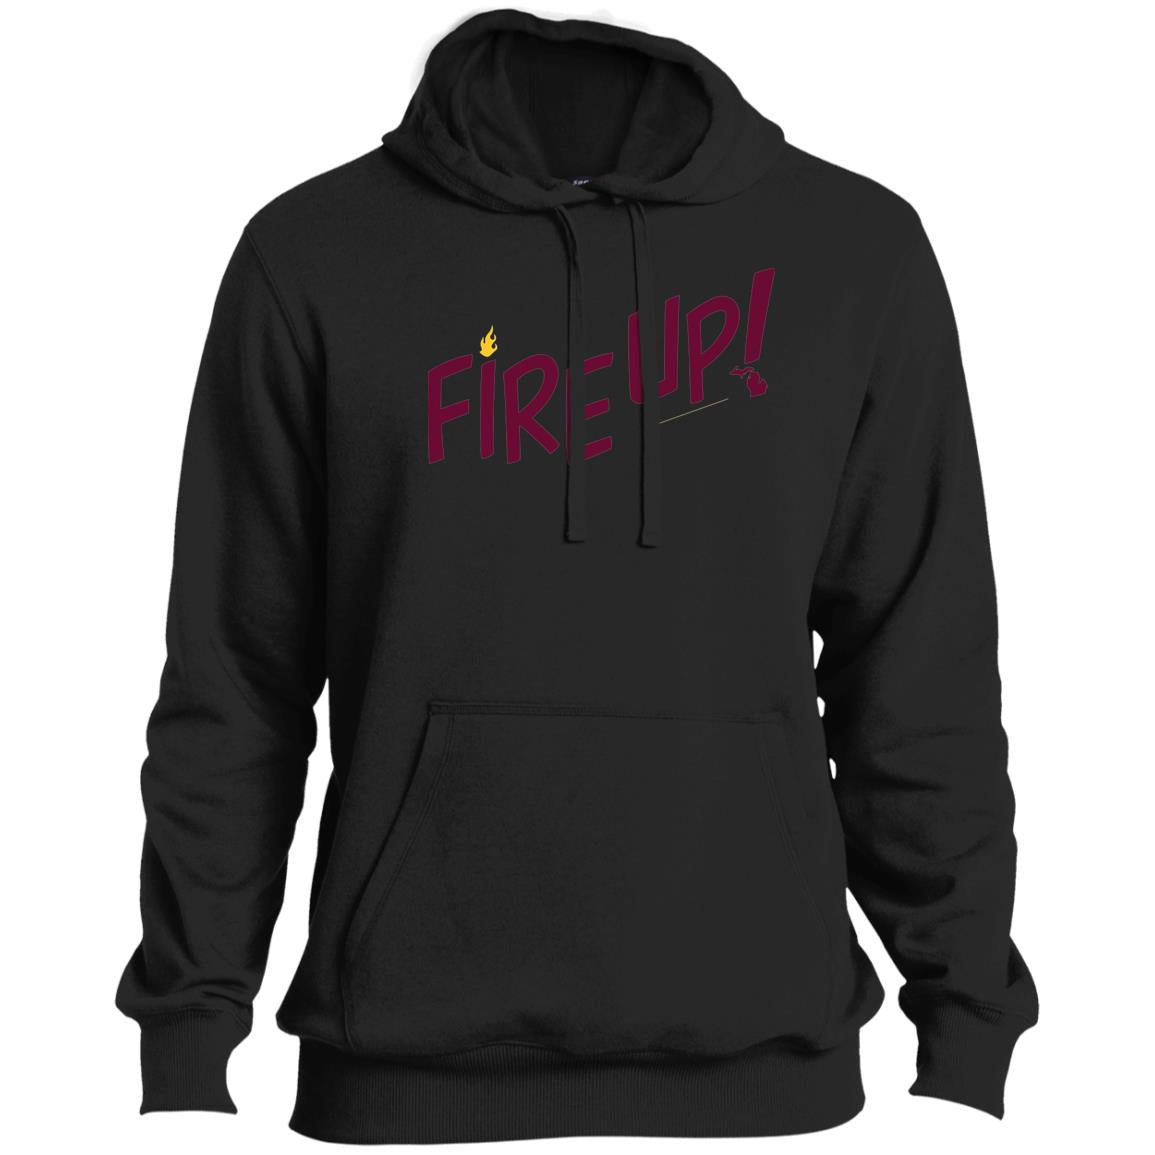 Fire Up! Tall Hoodie